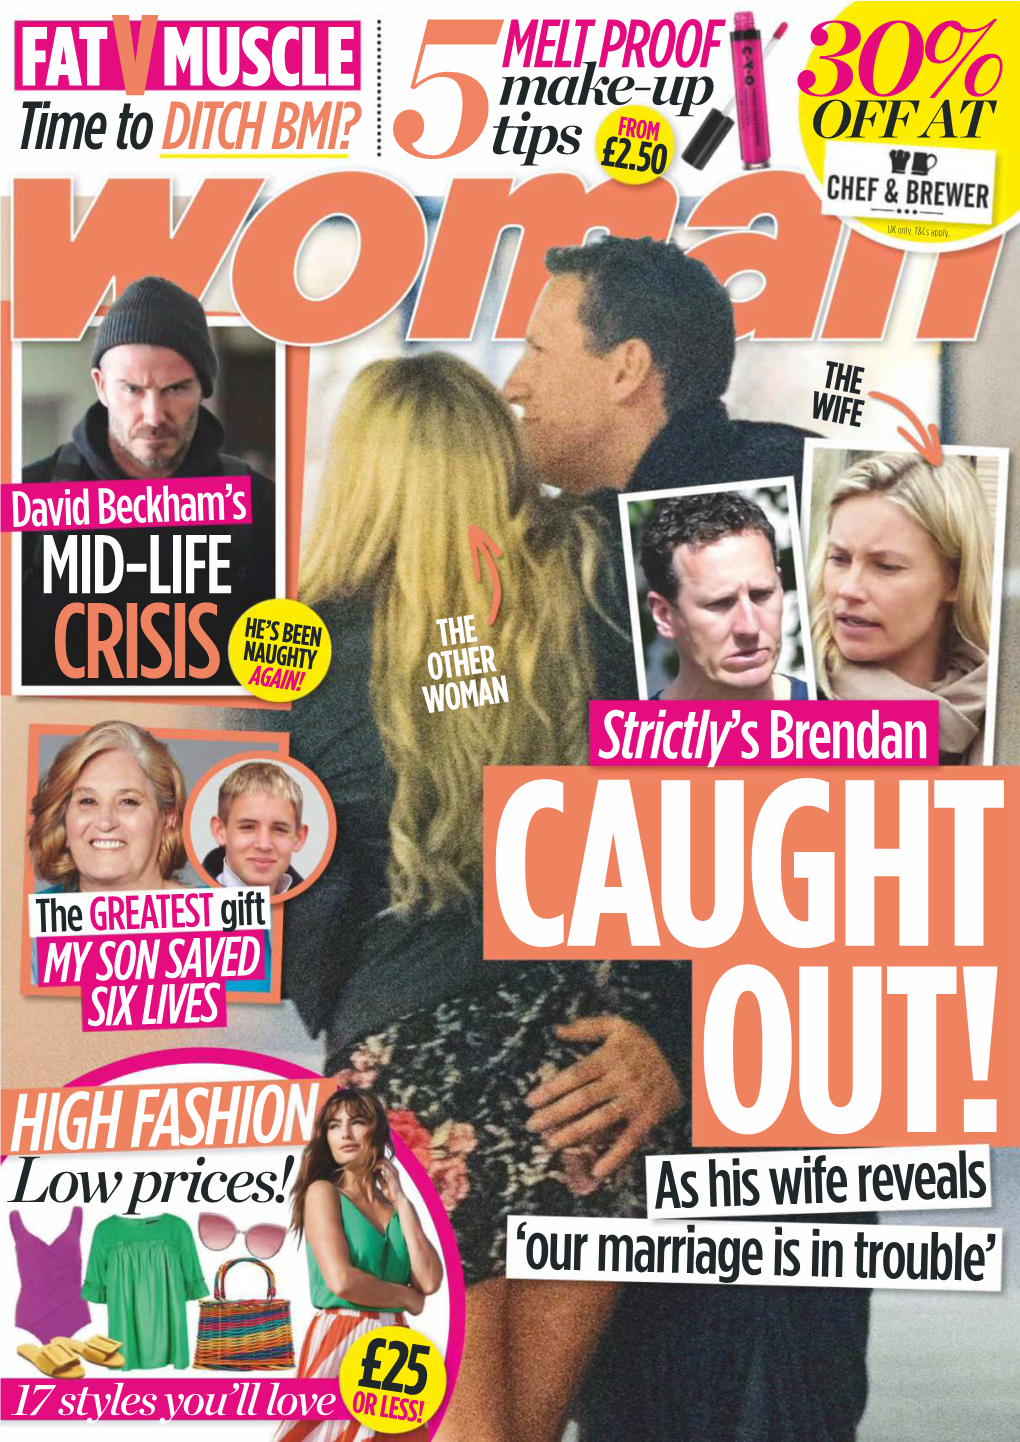 CRISIS AGAIN! OTHER WOMAN Strictly’S Brendan